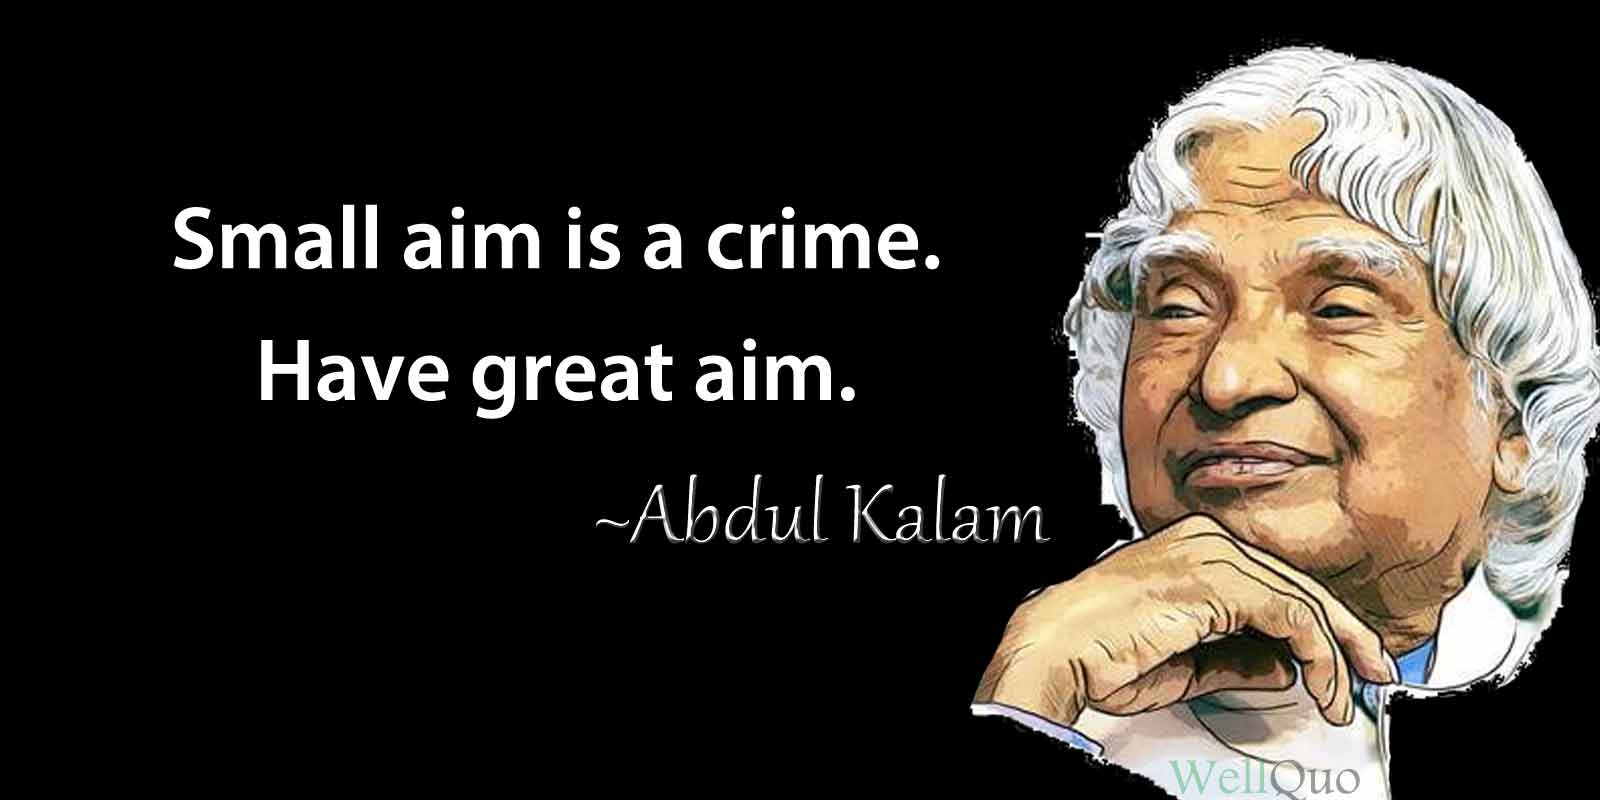 Abdul Kalam Quotes for Inspiration to Motivate You - Well Quo